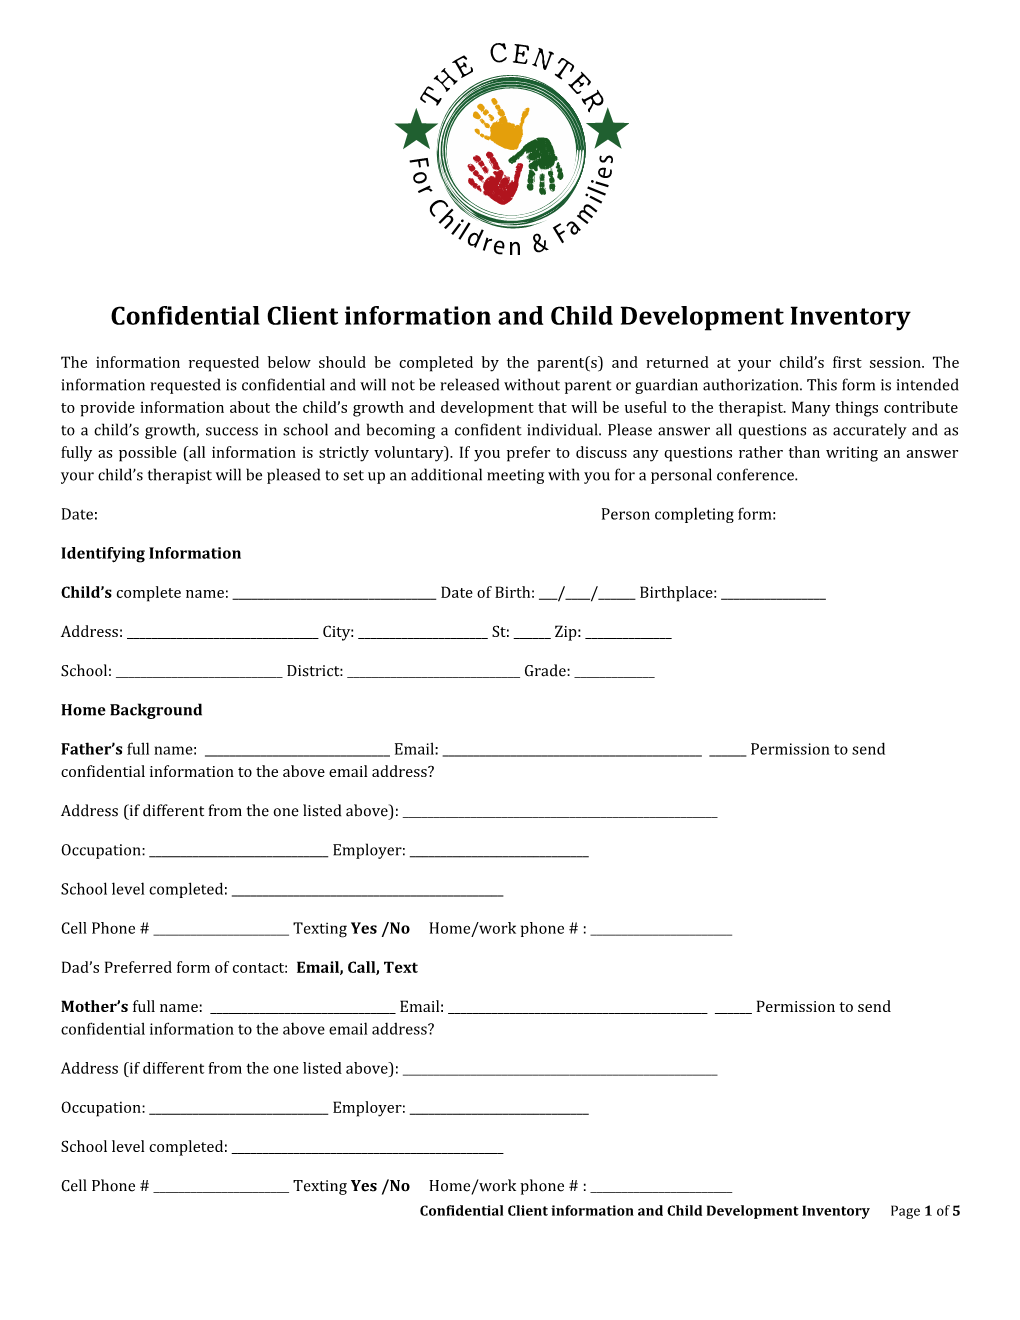 Confidential Client Information and Child Development Inventory